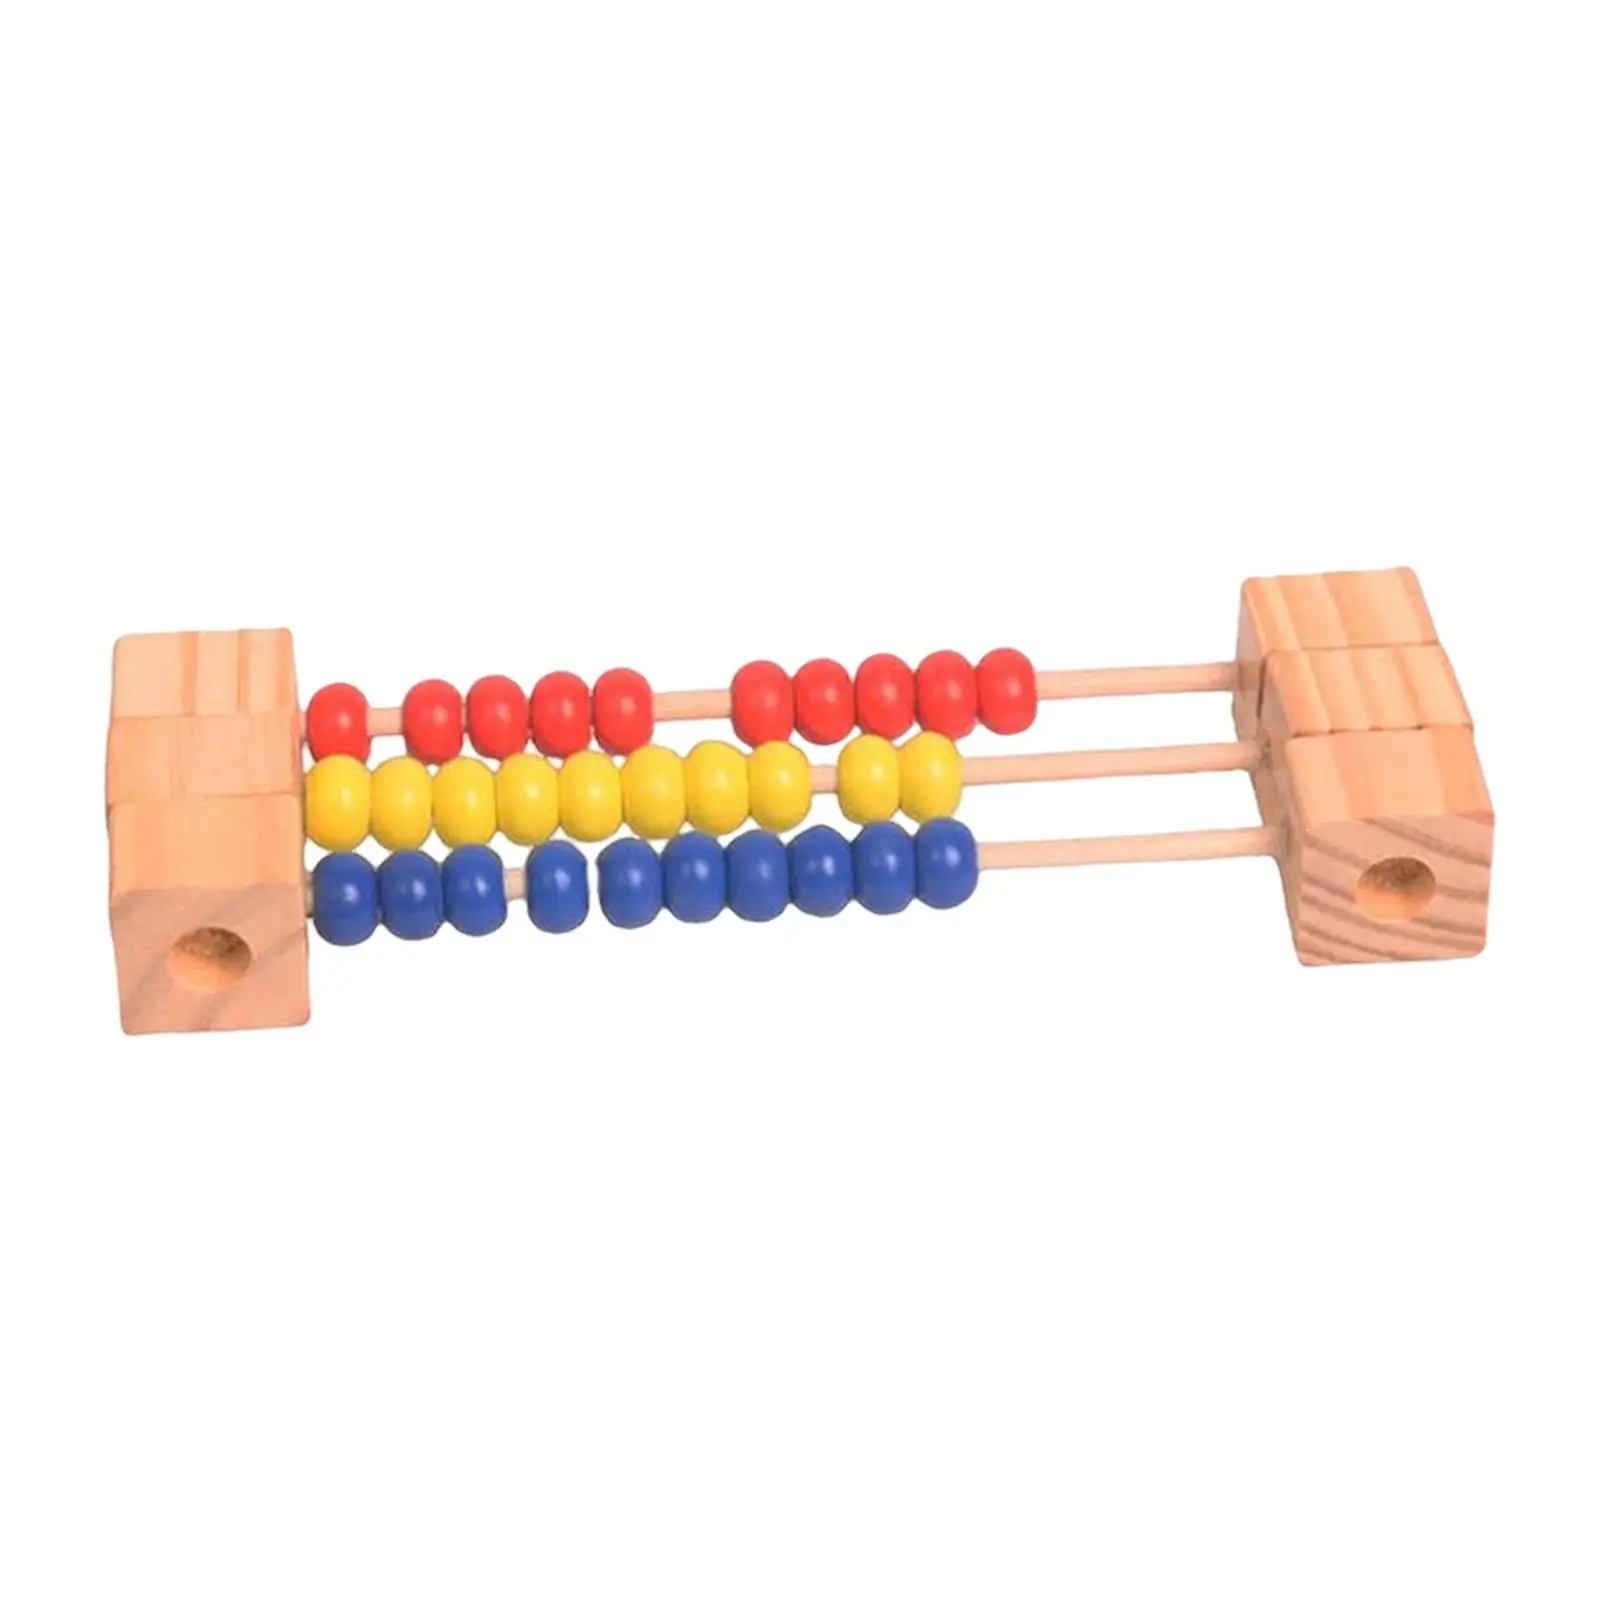 Montessori Wooden Abacus Counting Learning Toy Early Learning Educational Toy Miniature Counting Frame for Children Girls Gifts